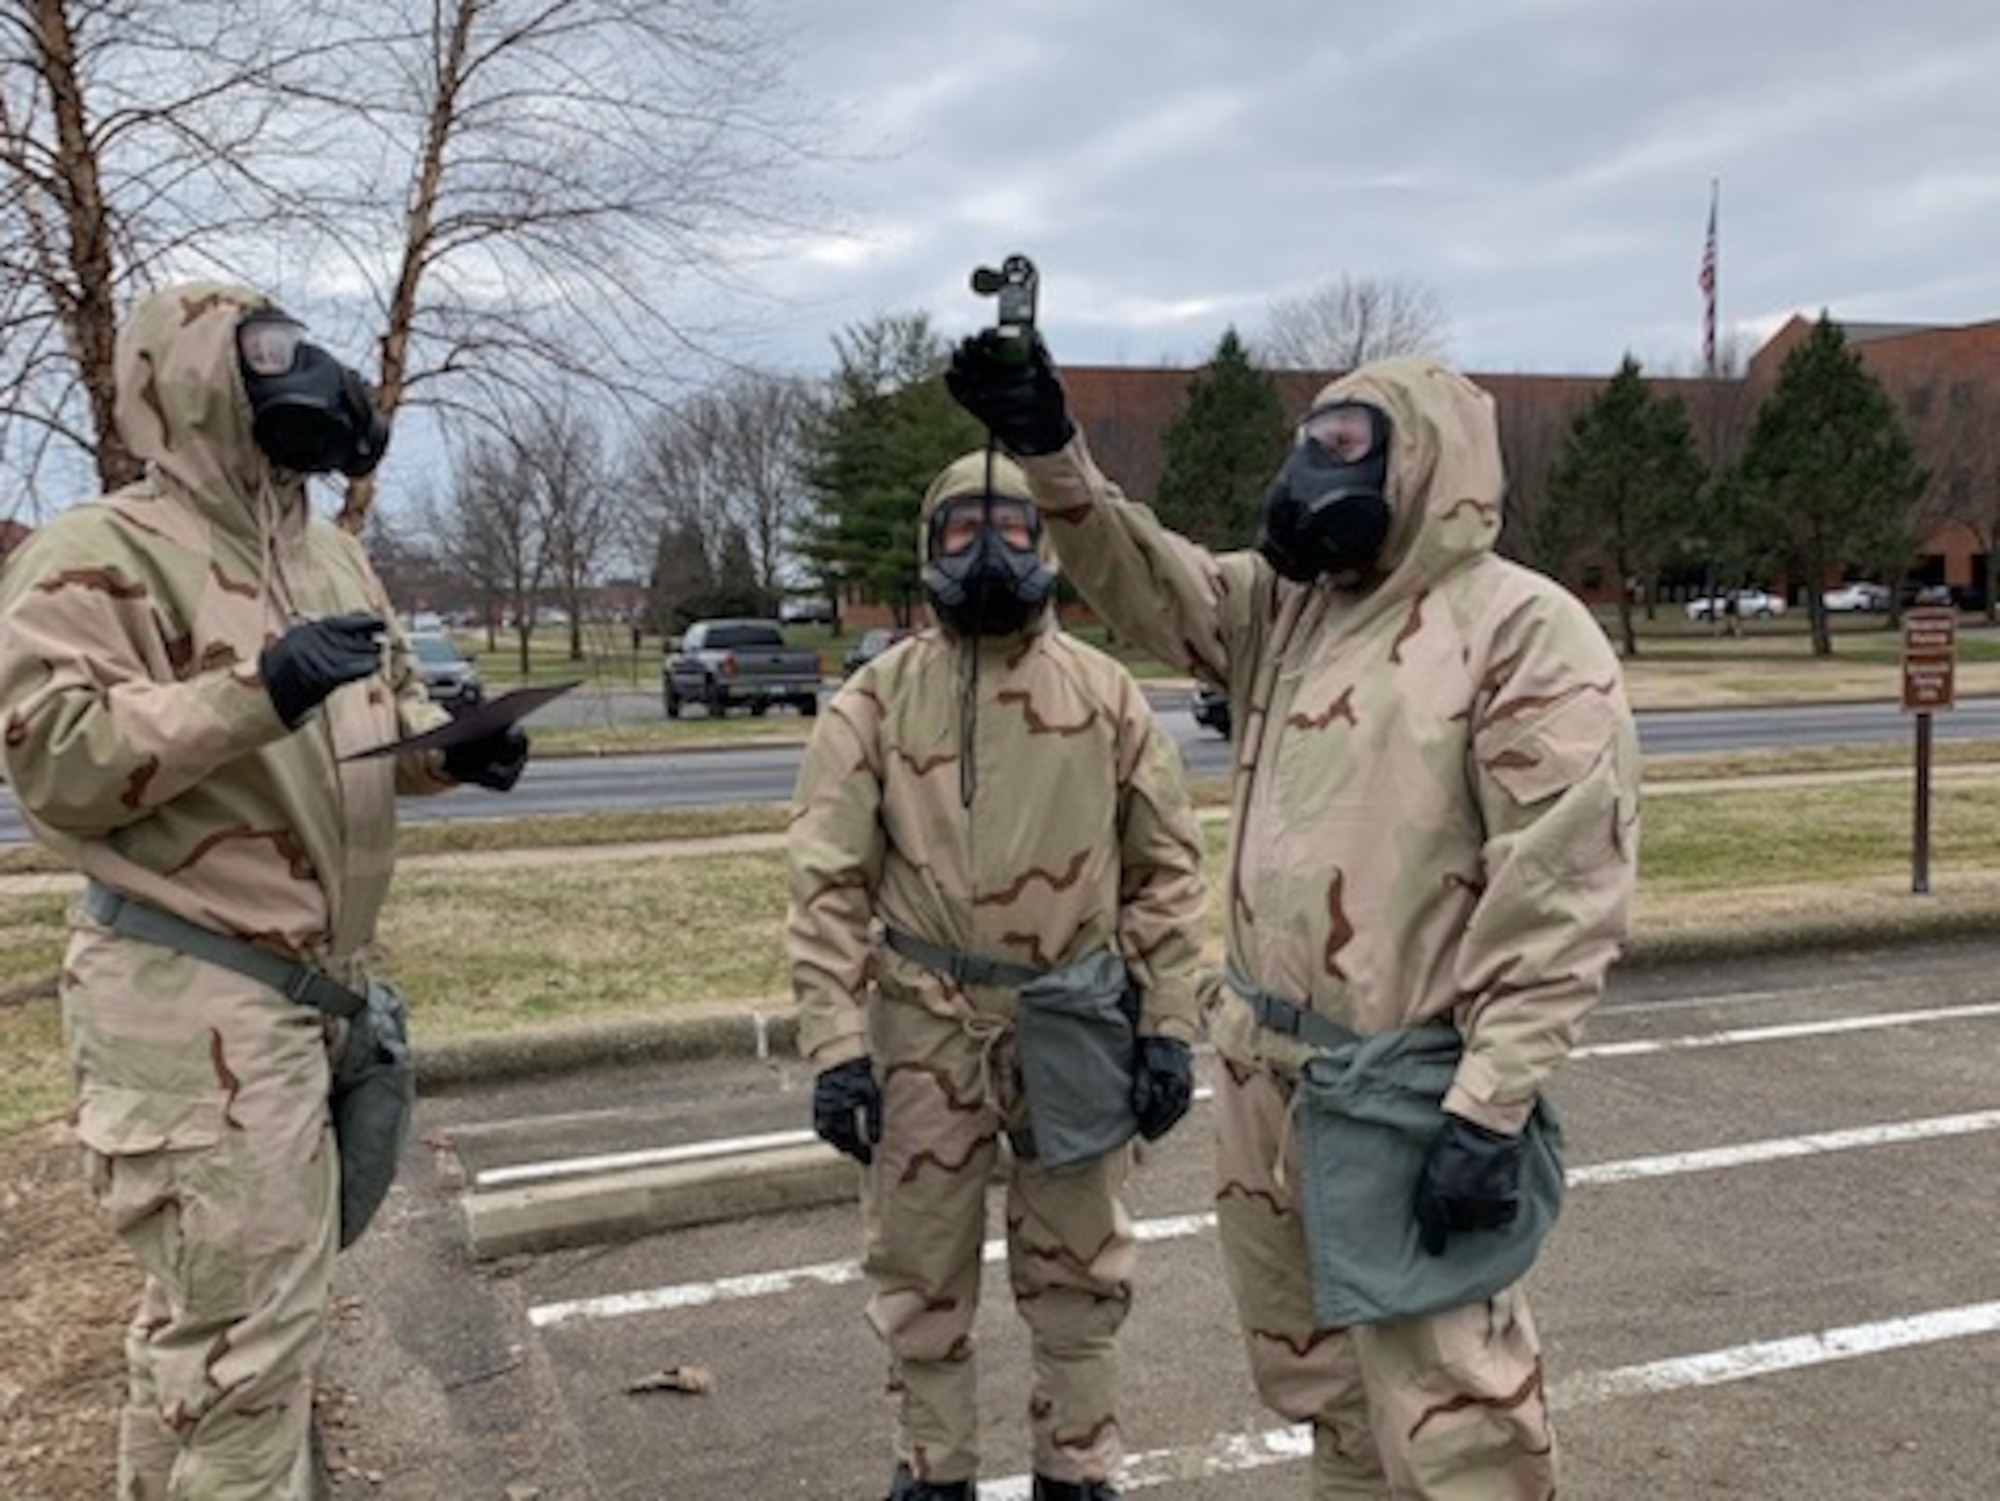 Airmen in protective gear taking weather readings.